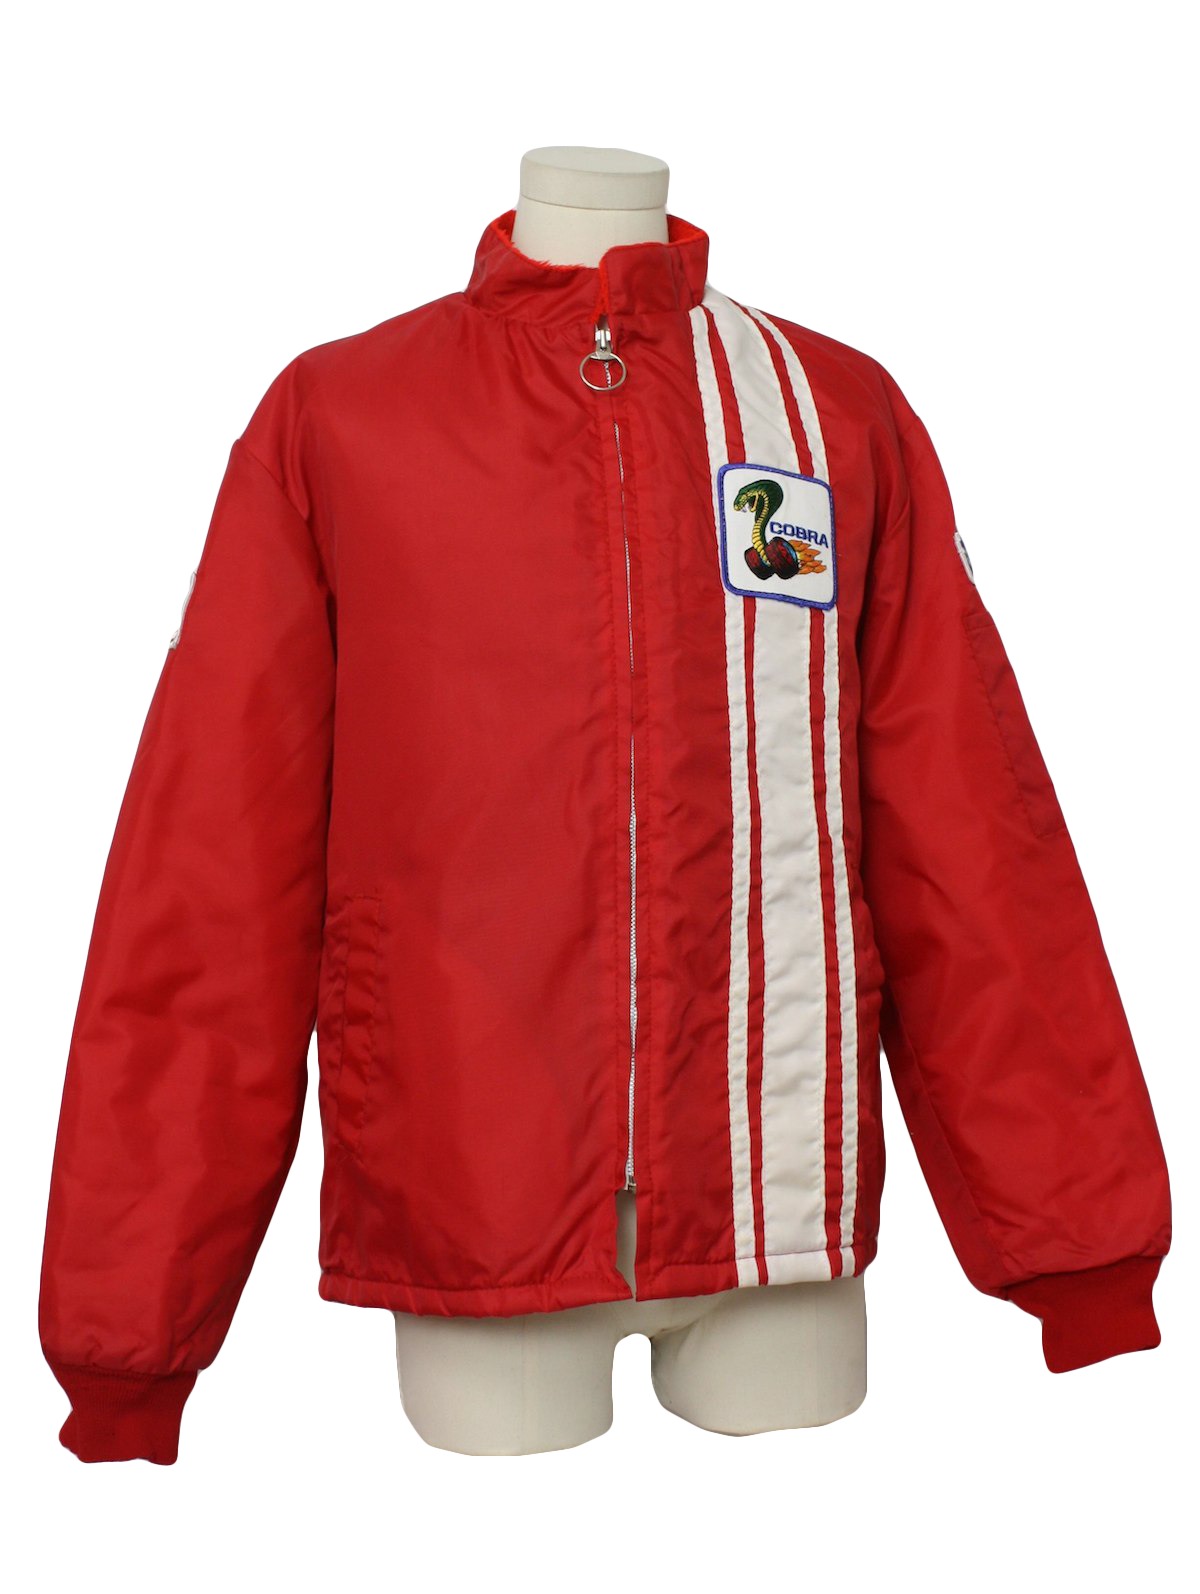 Ford racing jacket with cobra logo on it #5